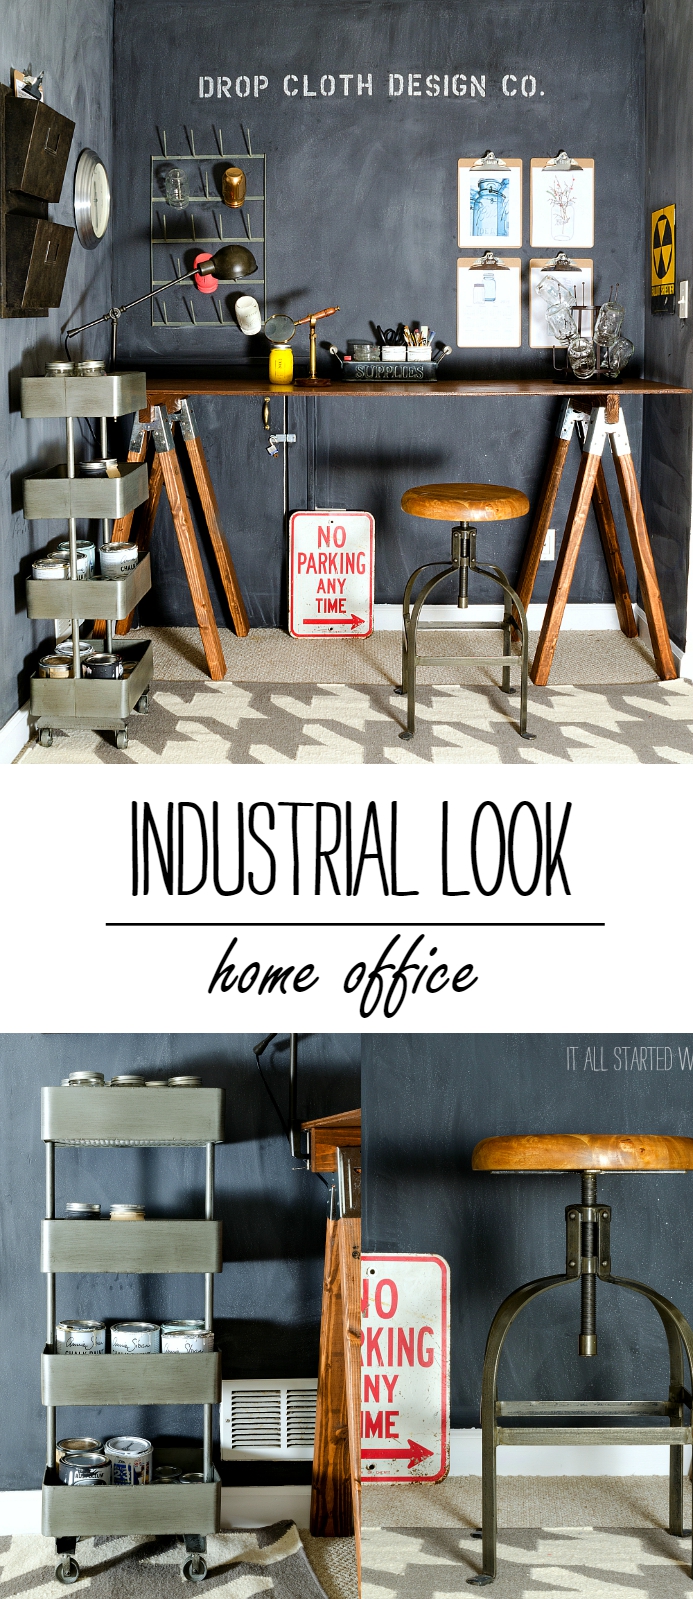 Home Office: Industrial Look With Chalkboard Wall and Sawhorse Desk